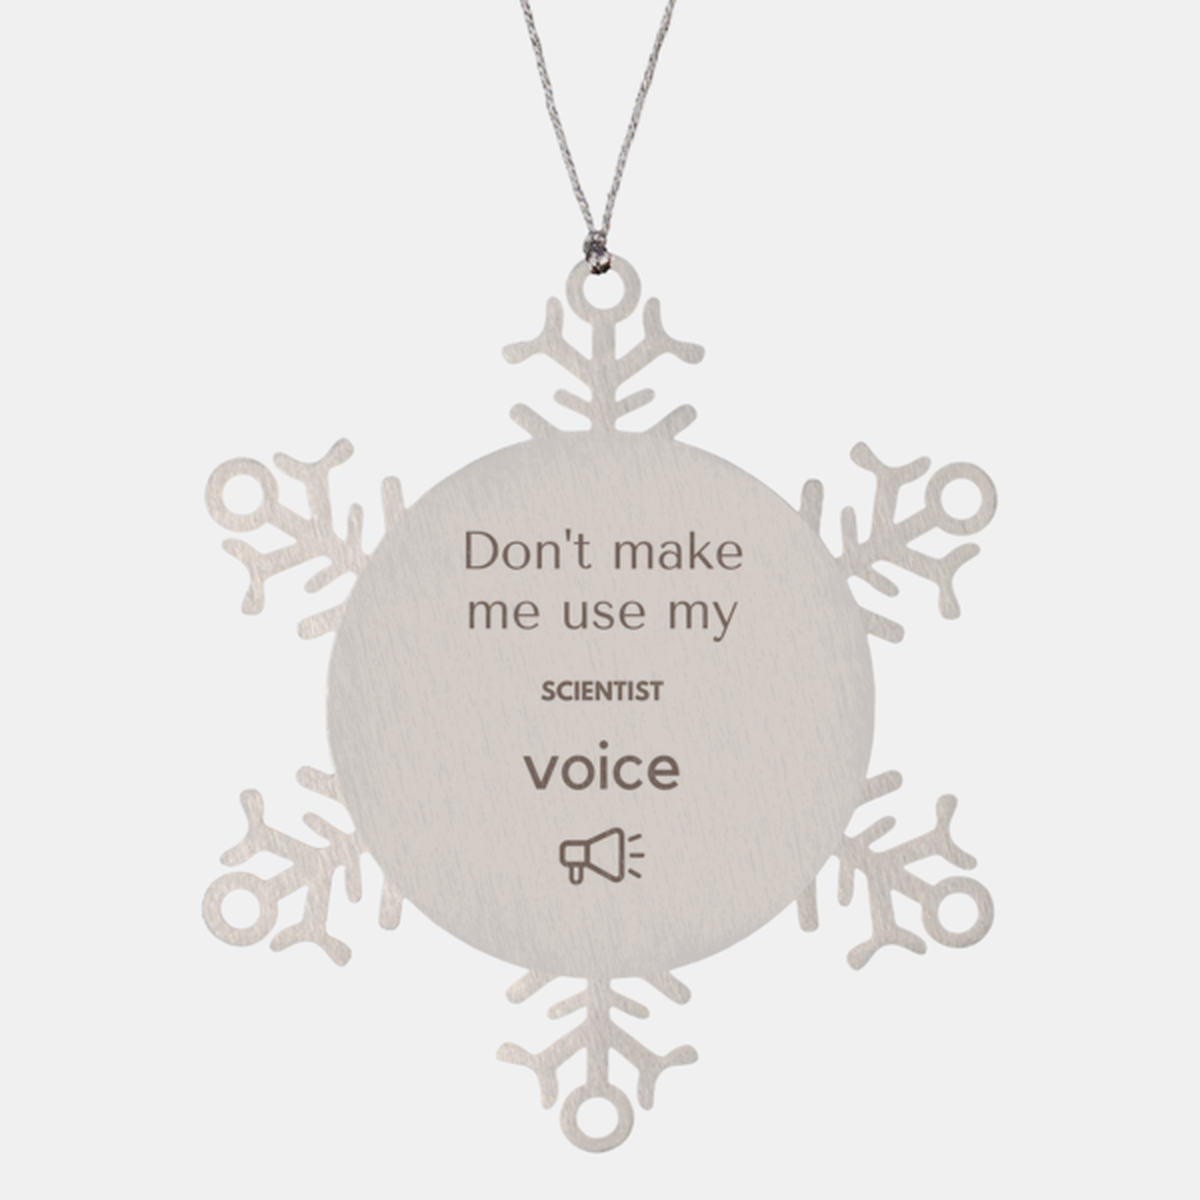 Don't make me use my Scientist voice, Sarcasm Scientist Ornament Gifts, Christmas Scientist Snowflake Ornament Unique Gifts For Scientist Coworkers, Men, Women, Colleague, Friends